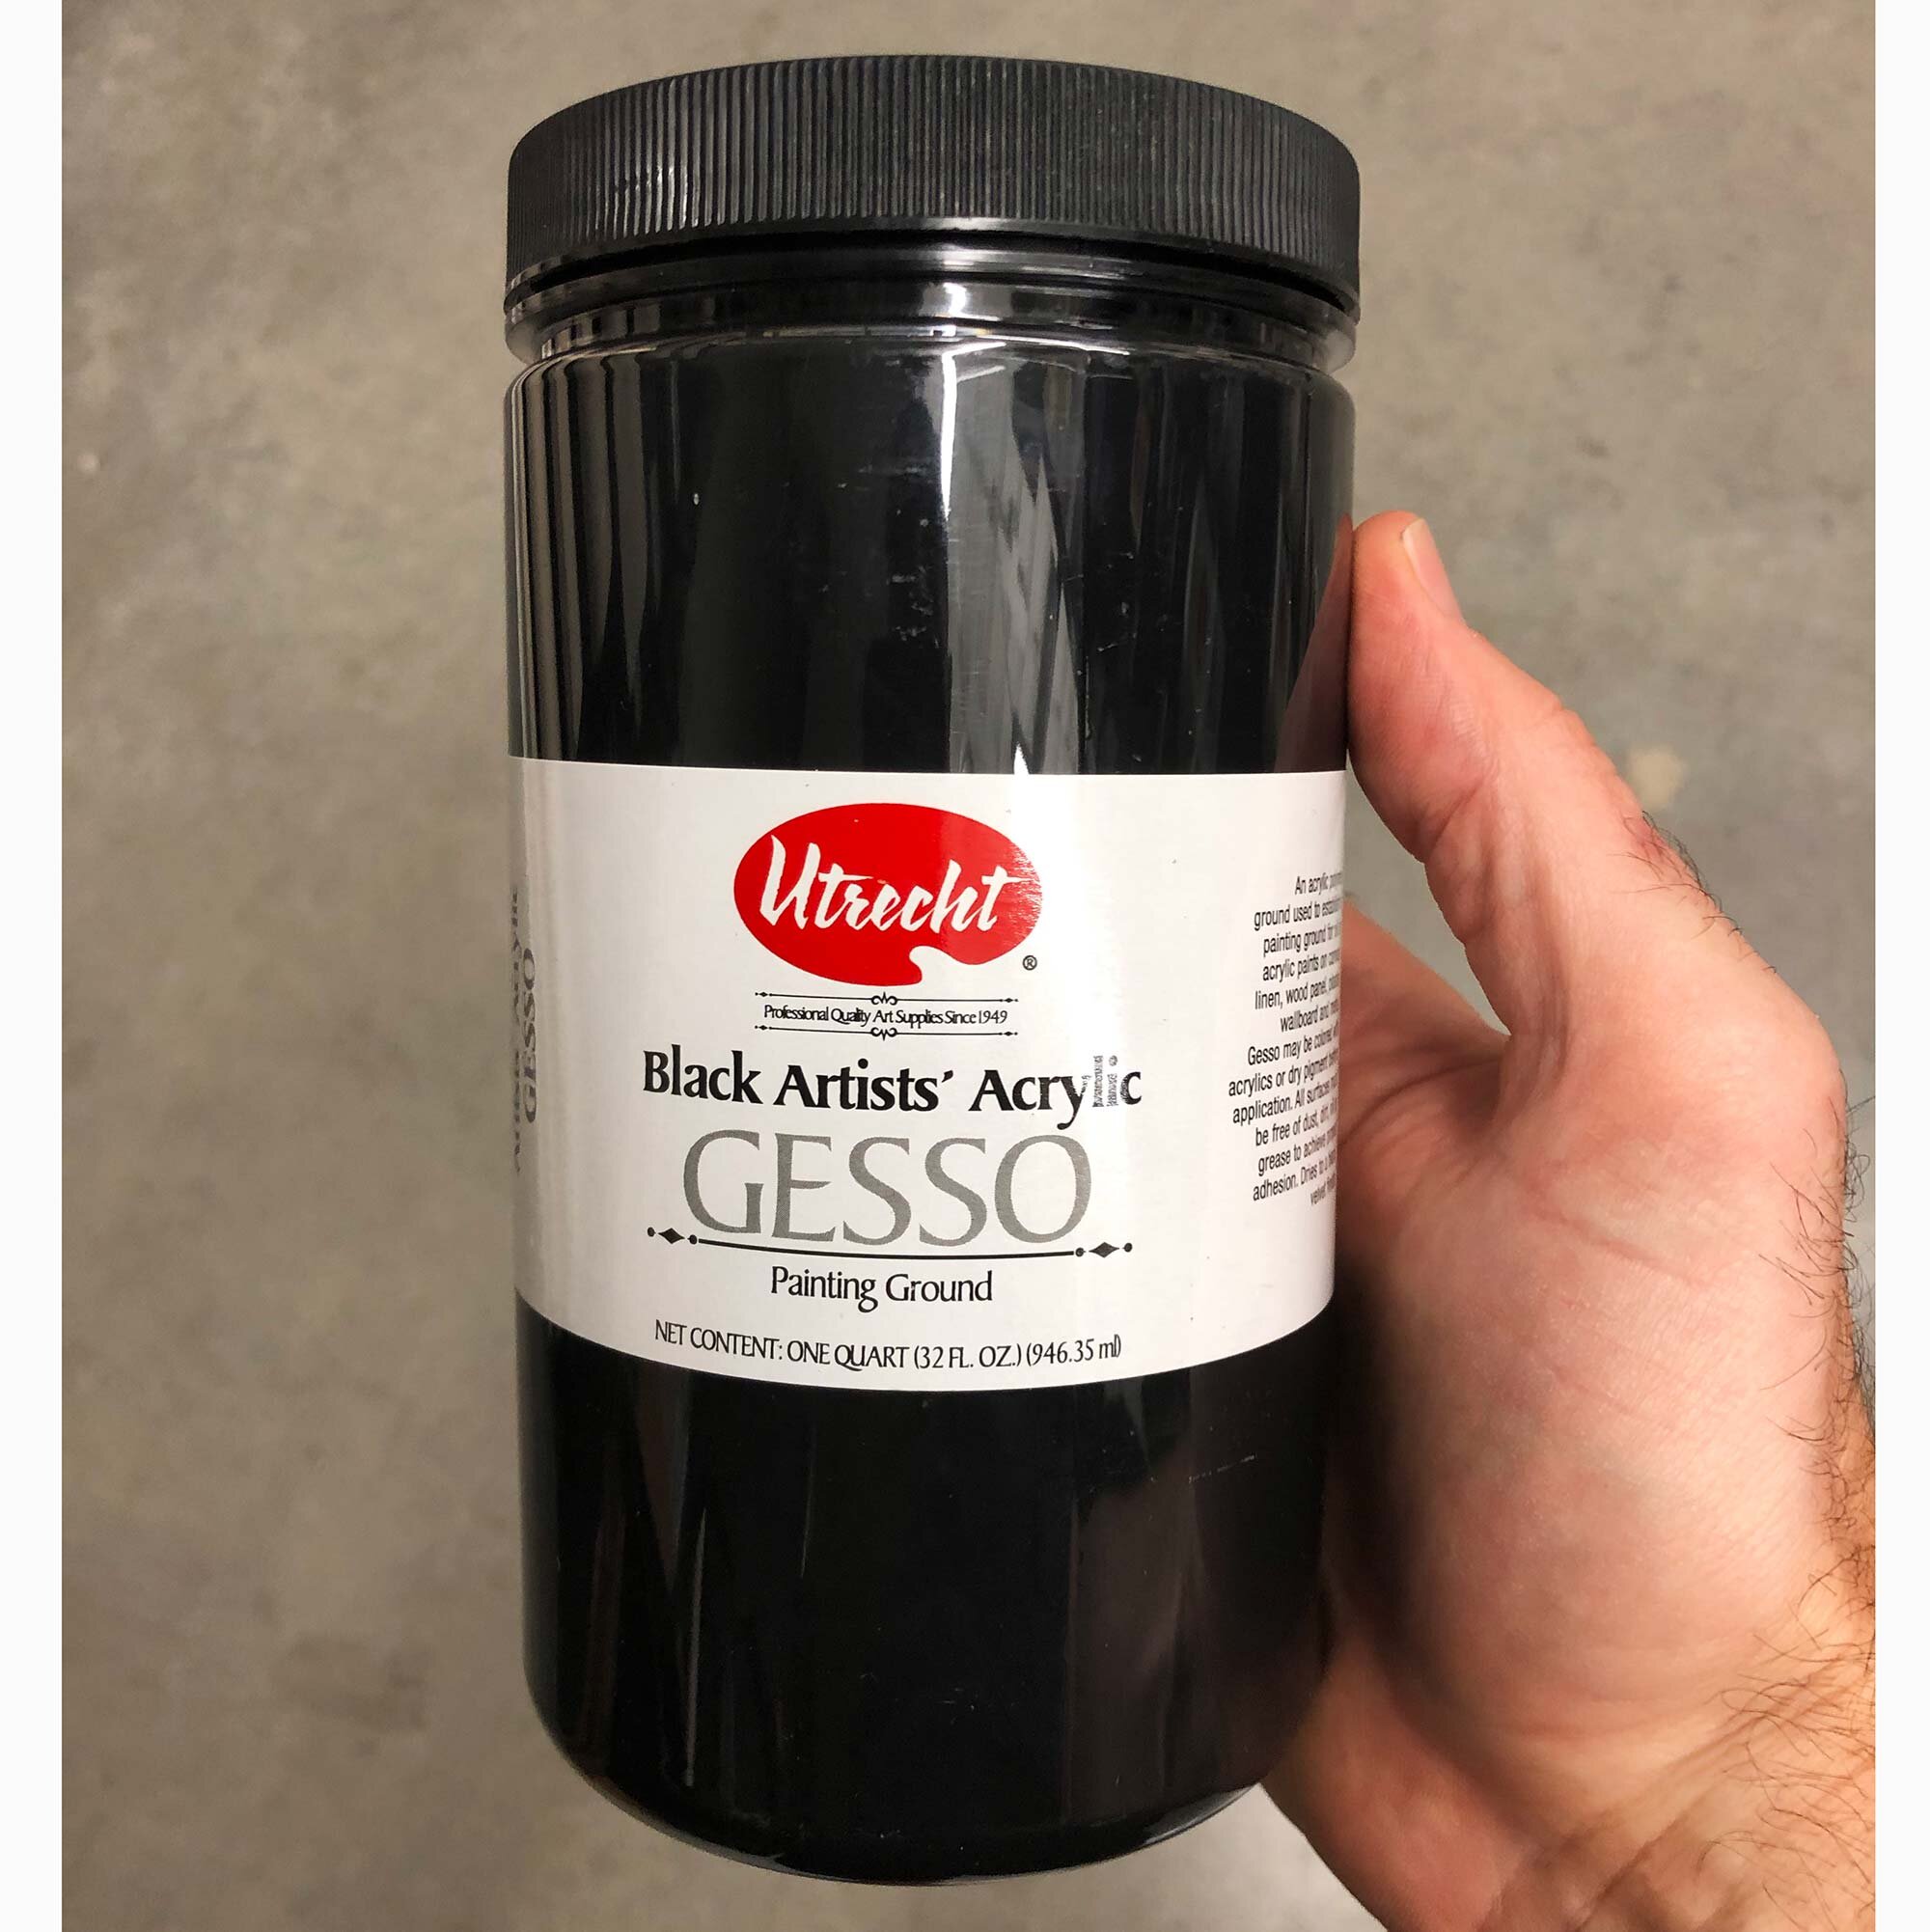 The Best Black Acrylic Gesso for Preparing Canvas — The Studio Manager